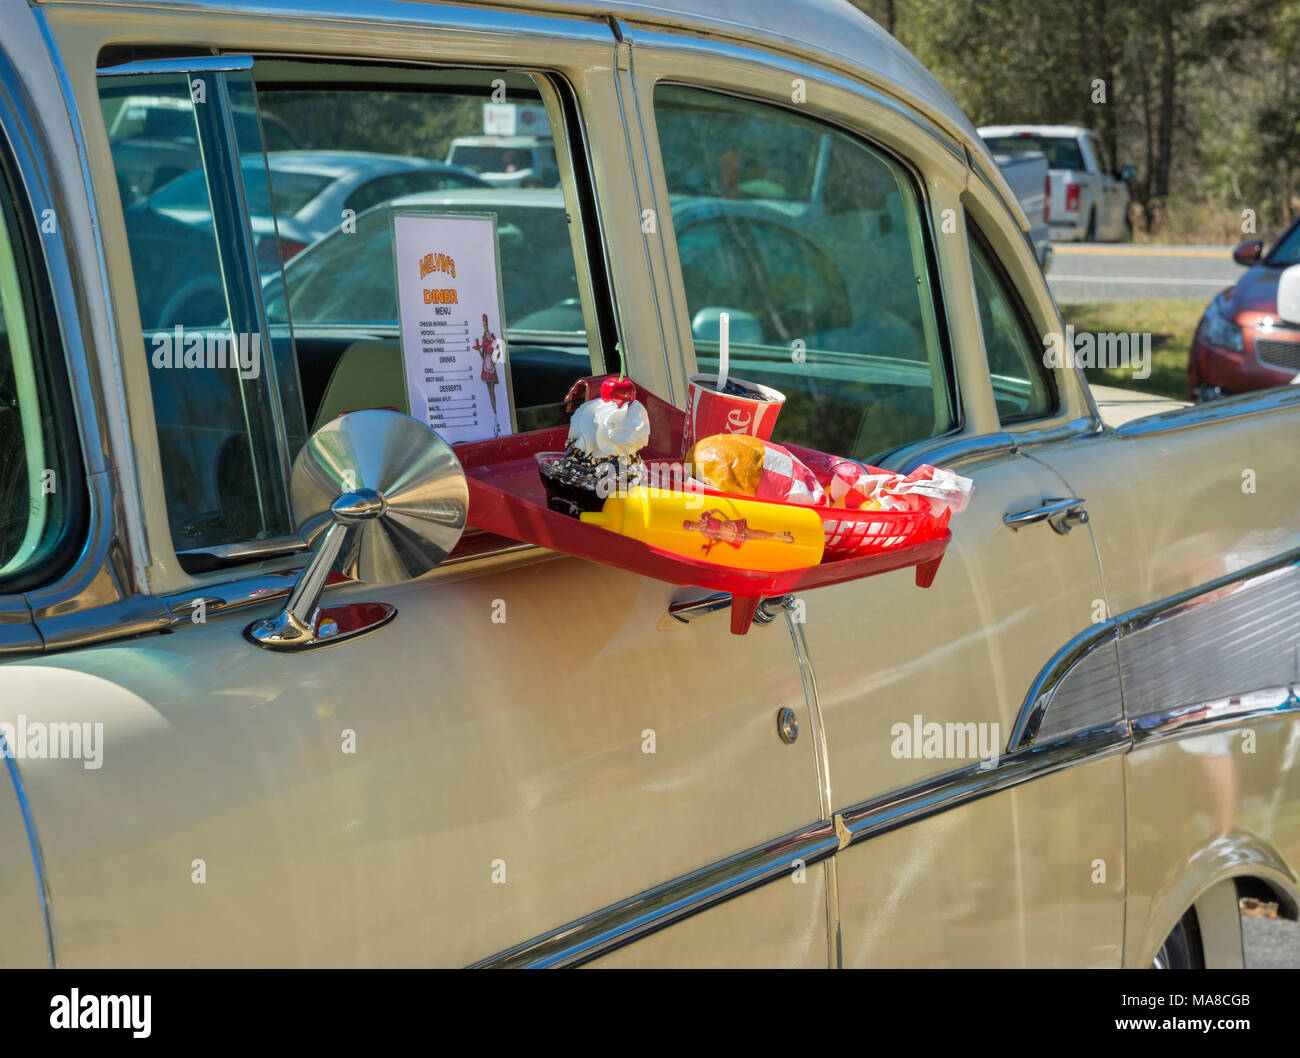 Car Show in Ft. White, Florida. Car Hop Tray in window of a 1957 Chevrolet classic car. Stock Photo